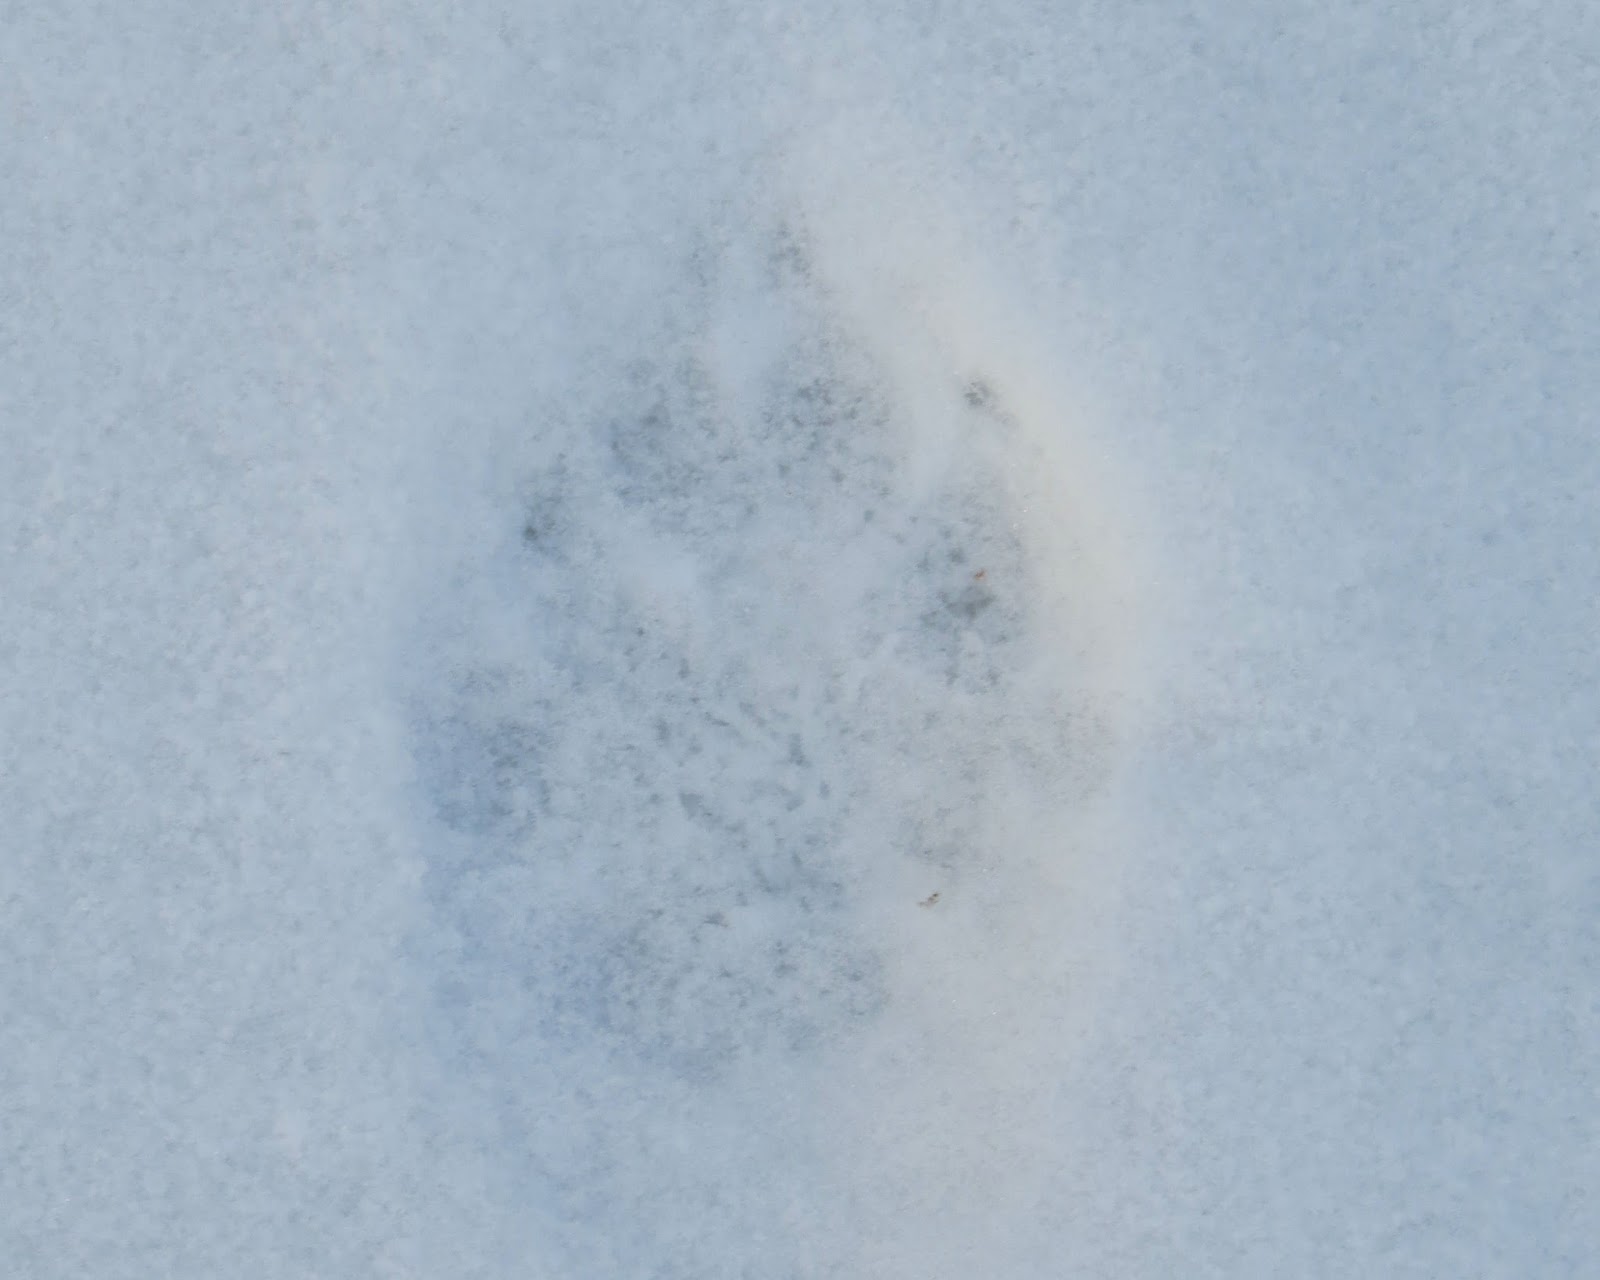 canine track in snow